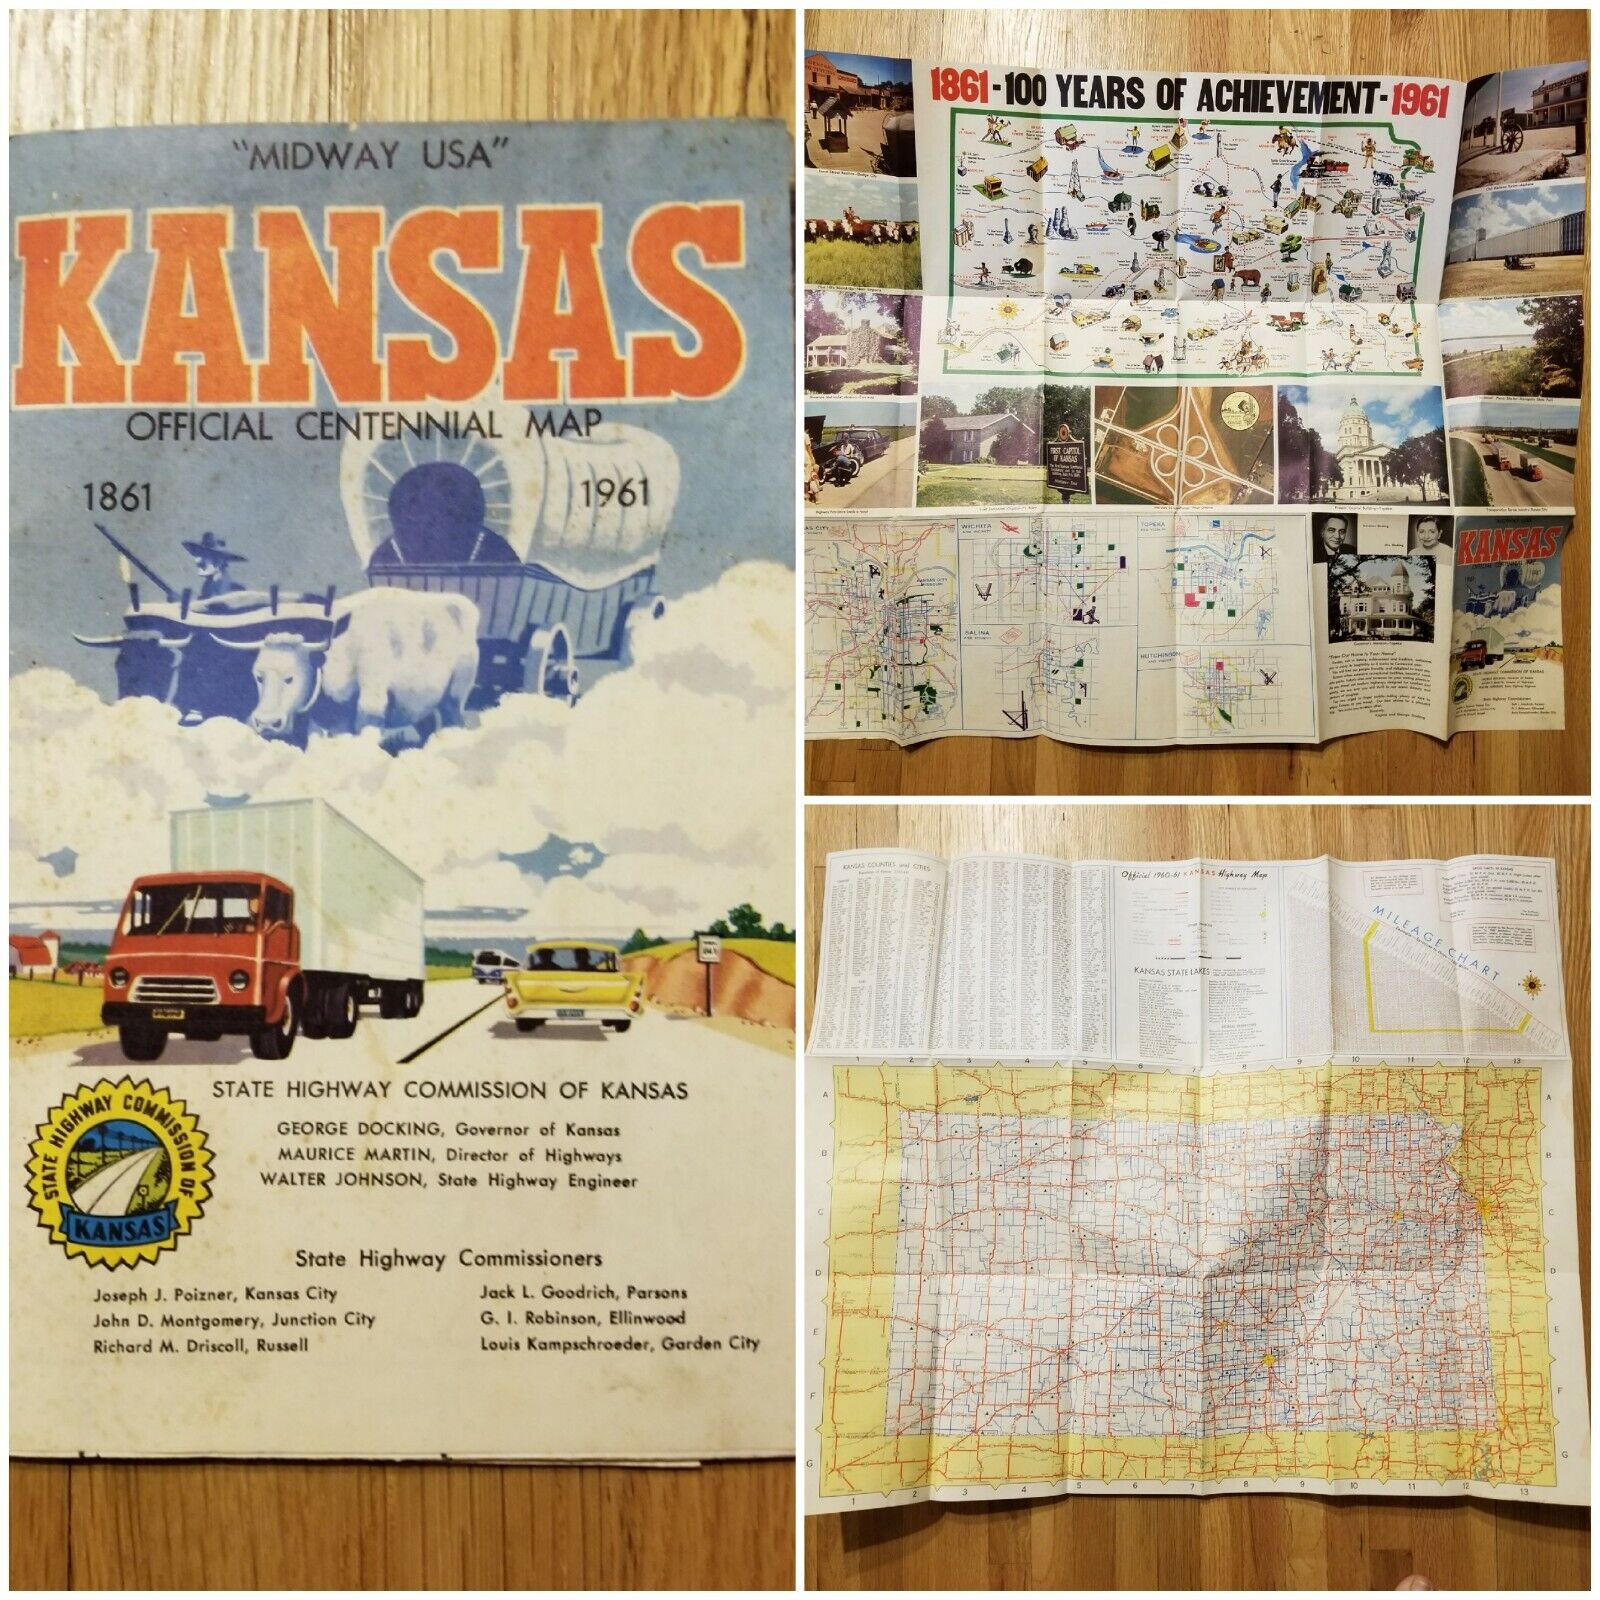 Kansas Official Centennial Map 1861-1961 State Highway Commission Midway USA